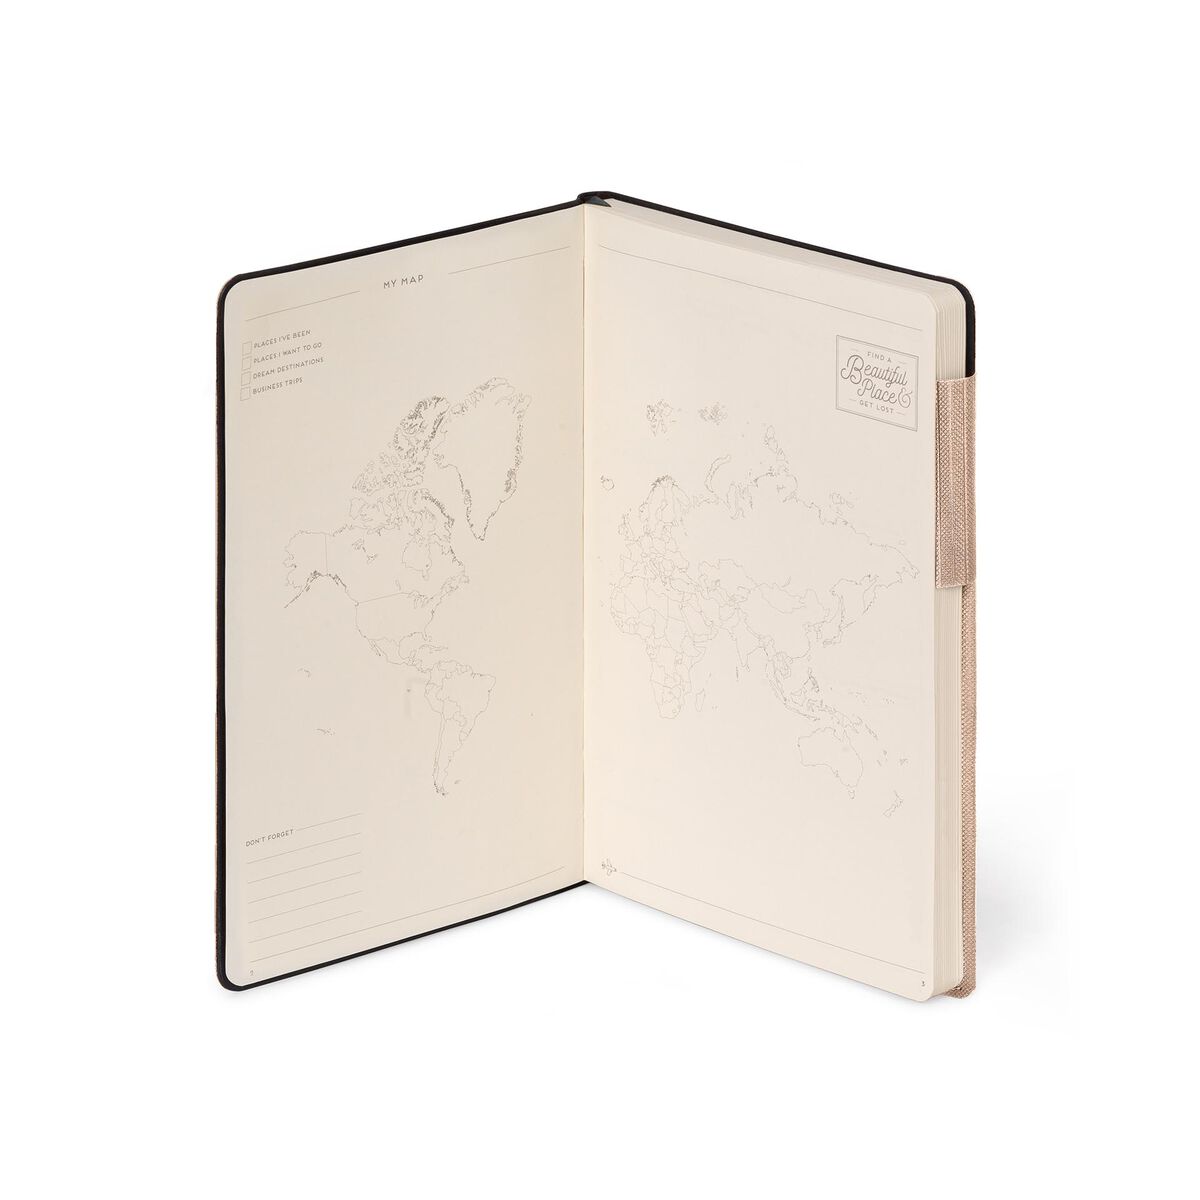 Notebooks | Legami Medium Notebook with lined pages Metallic Rose Gold by Weirs of Baggot Street